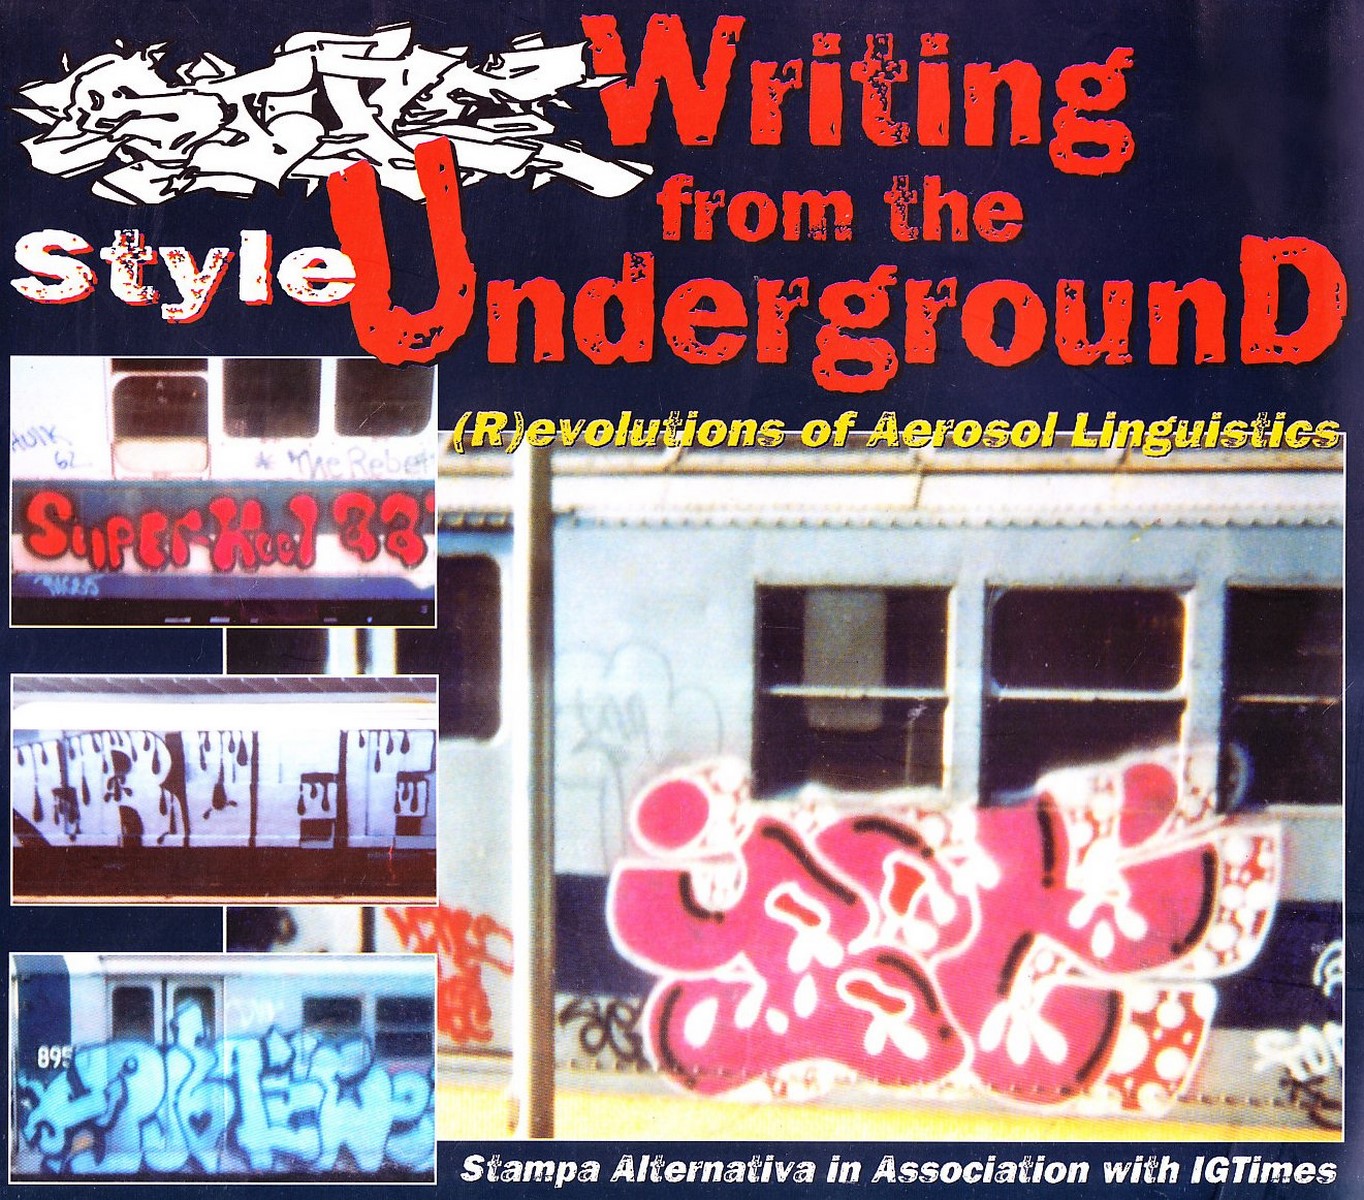 “Style. Writing from the Underground”